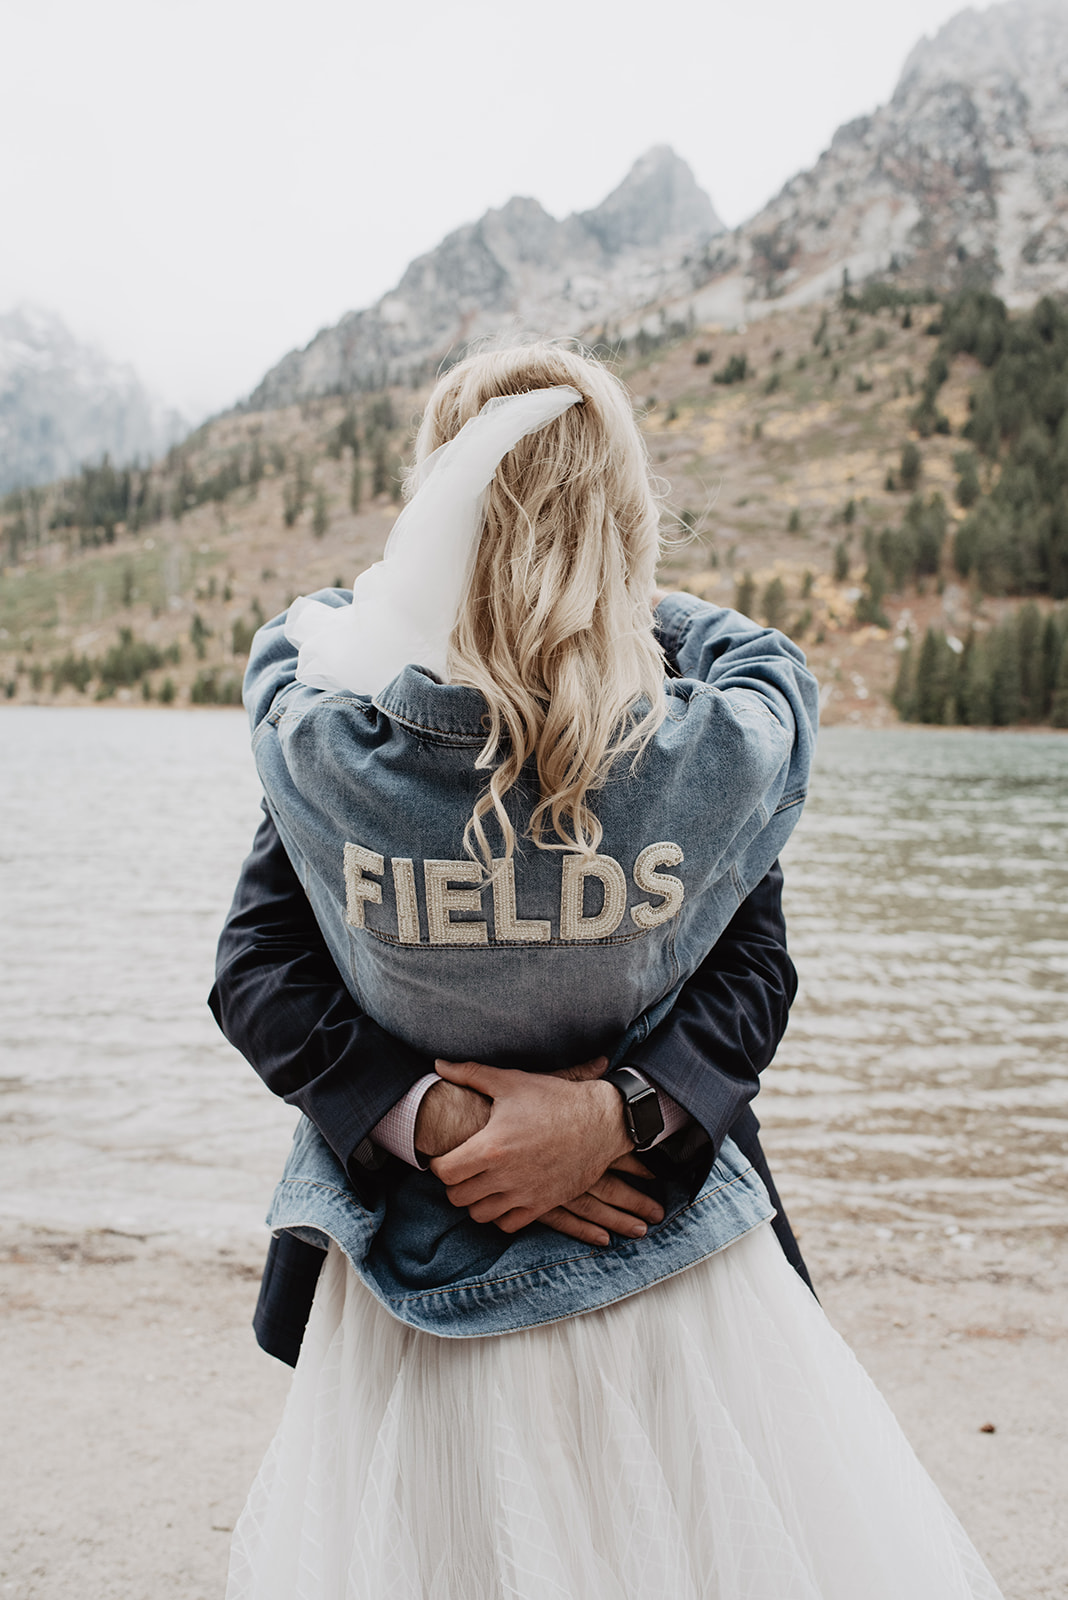 Bentwood Inn wedding venues String Lake wedding photos with bride in a denim jacket with her new last name holding her groom around her shoulder as he holds her around the waist as they stand together in front of the lake for their Jackson Hole weddings